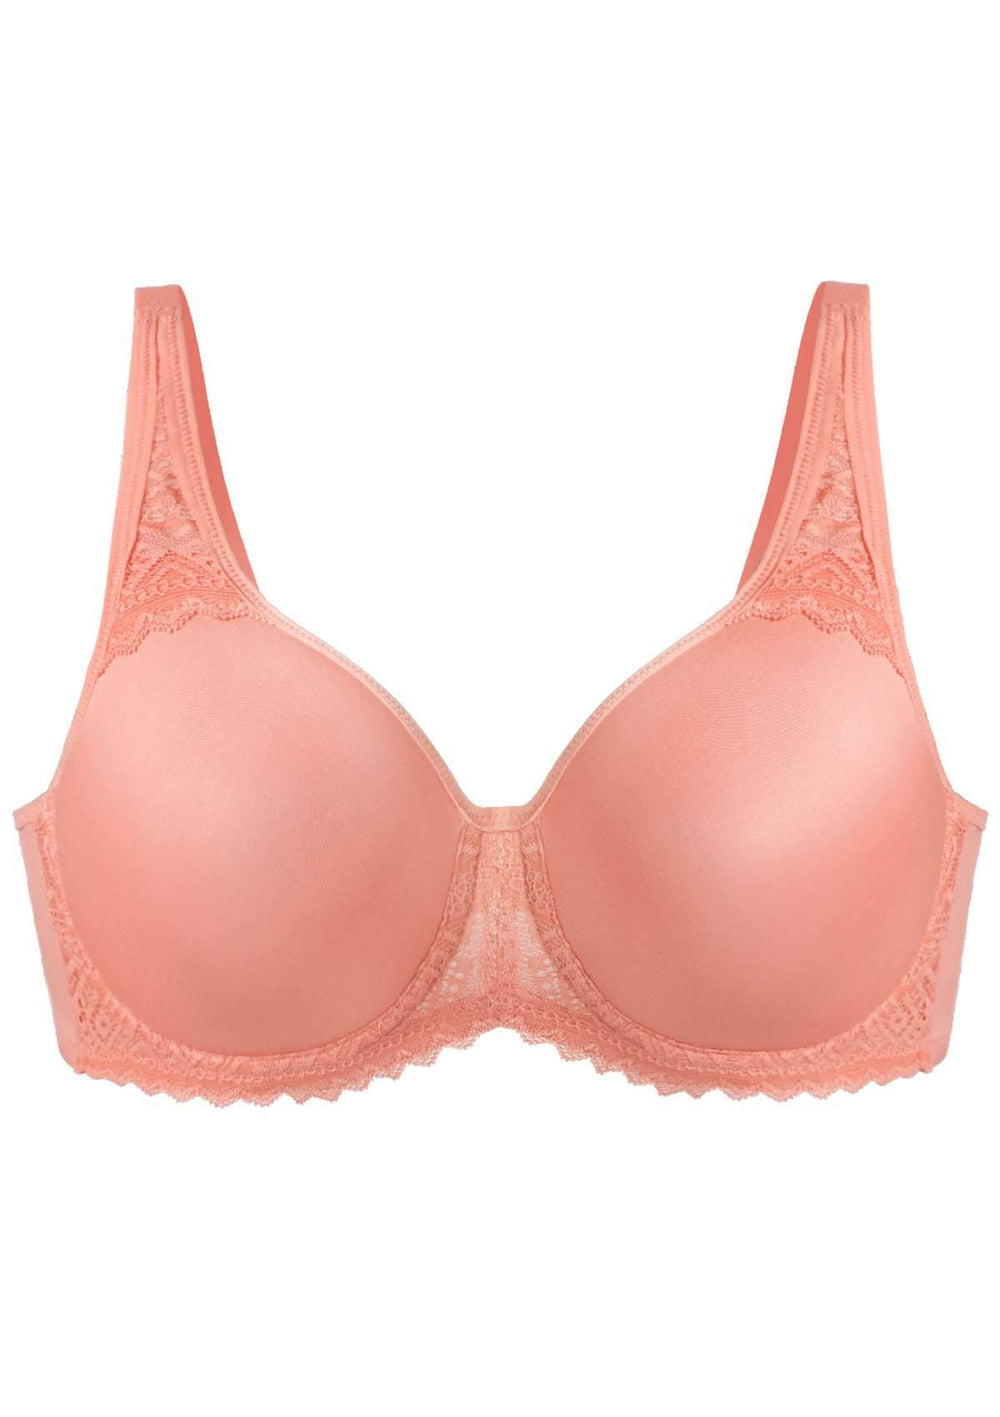 Underwired Minimiser Bra Basic by VIANIA 14586 34-48 C-F in 3 colours